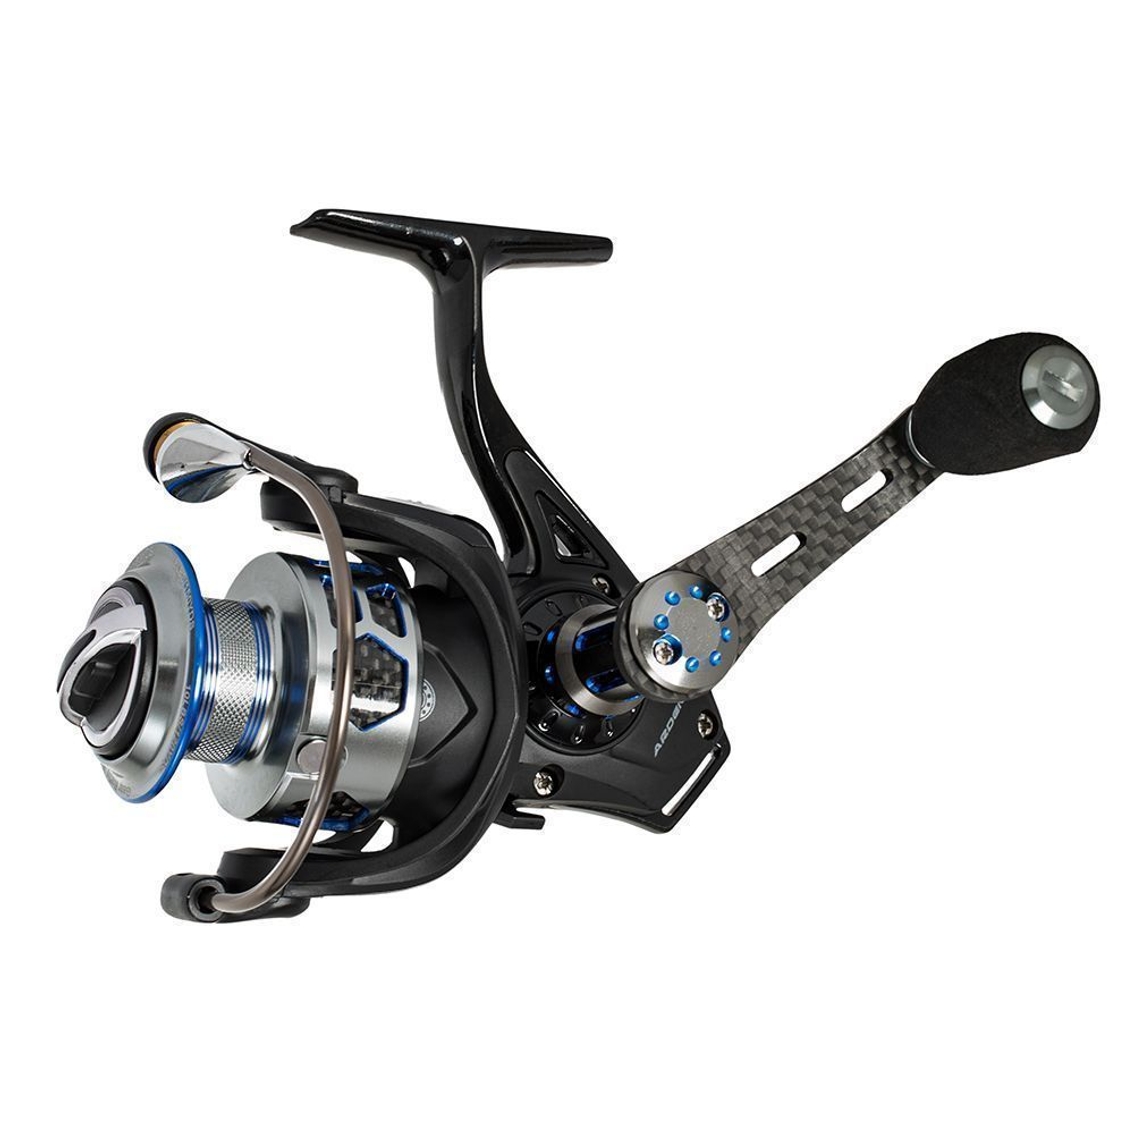 Ardent Bolt Spinning Reel - 1000 Size Left Or Right Hand Interchangable  Retrieve, Fishing, Sports & Outdoors